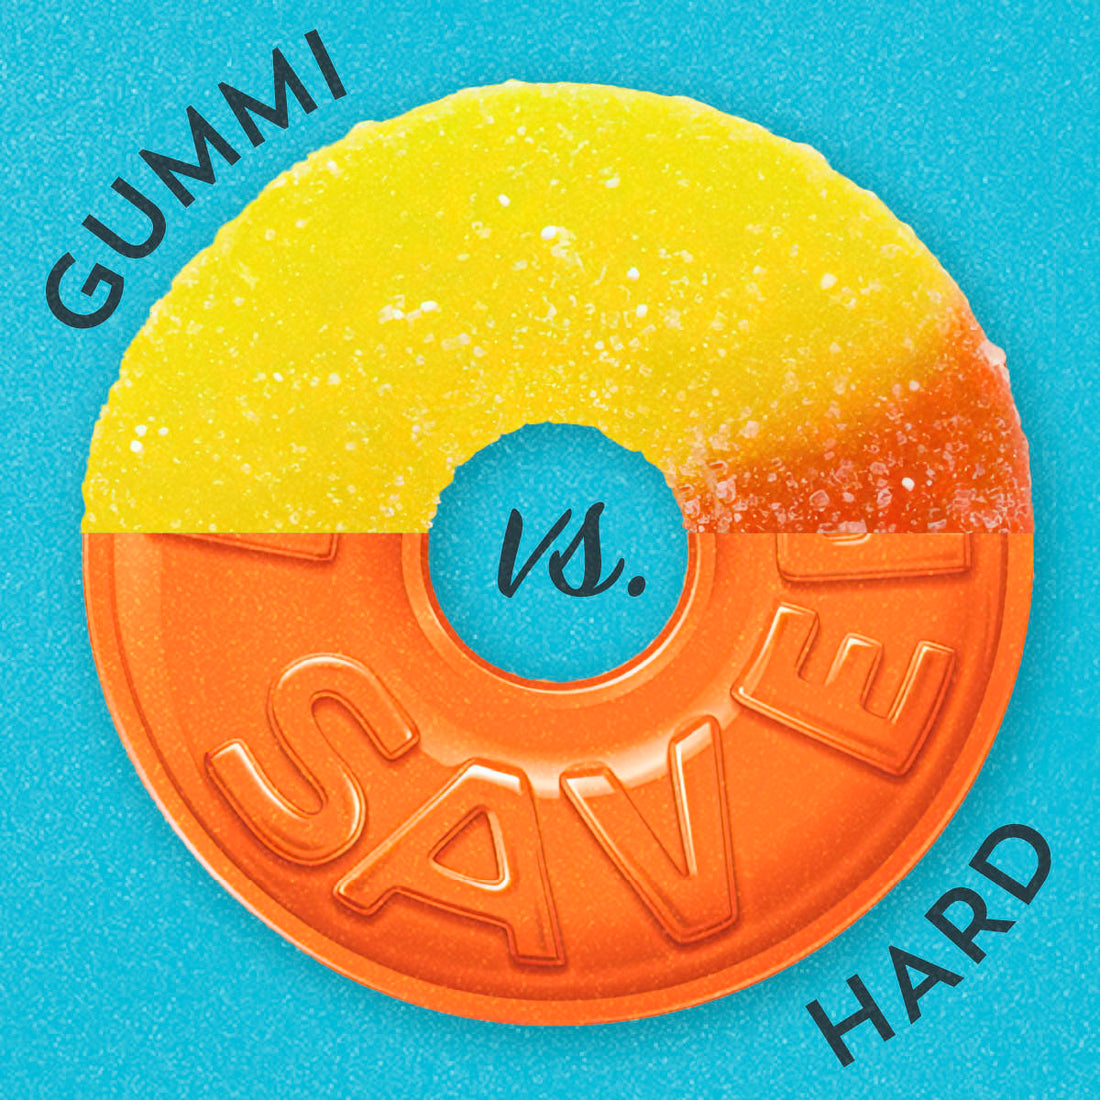 Gummi vs. Hard Candy: Which Is Better?